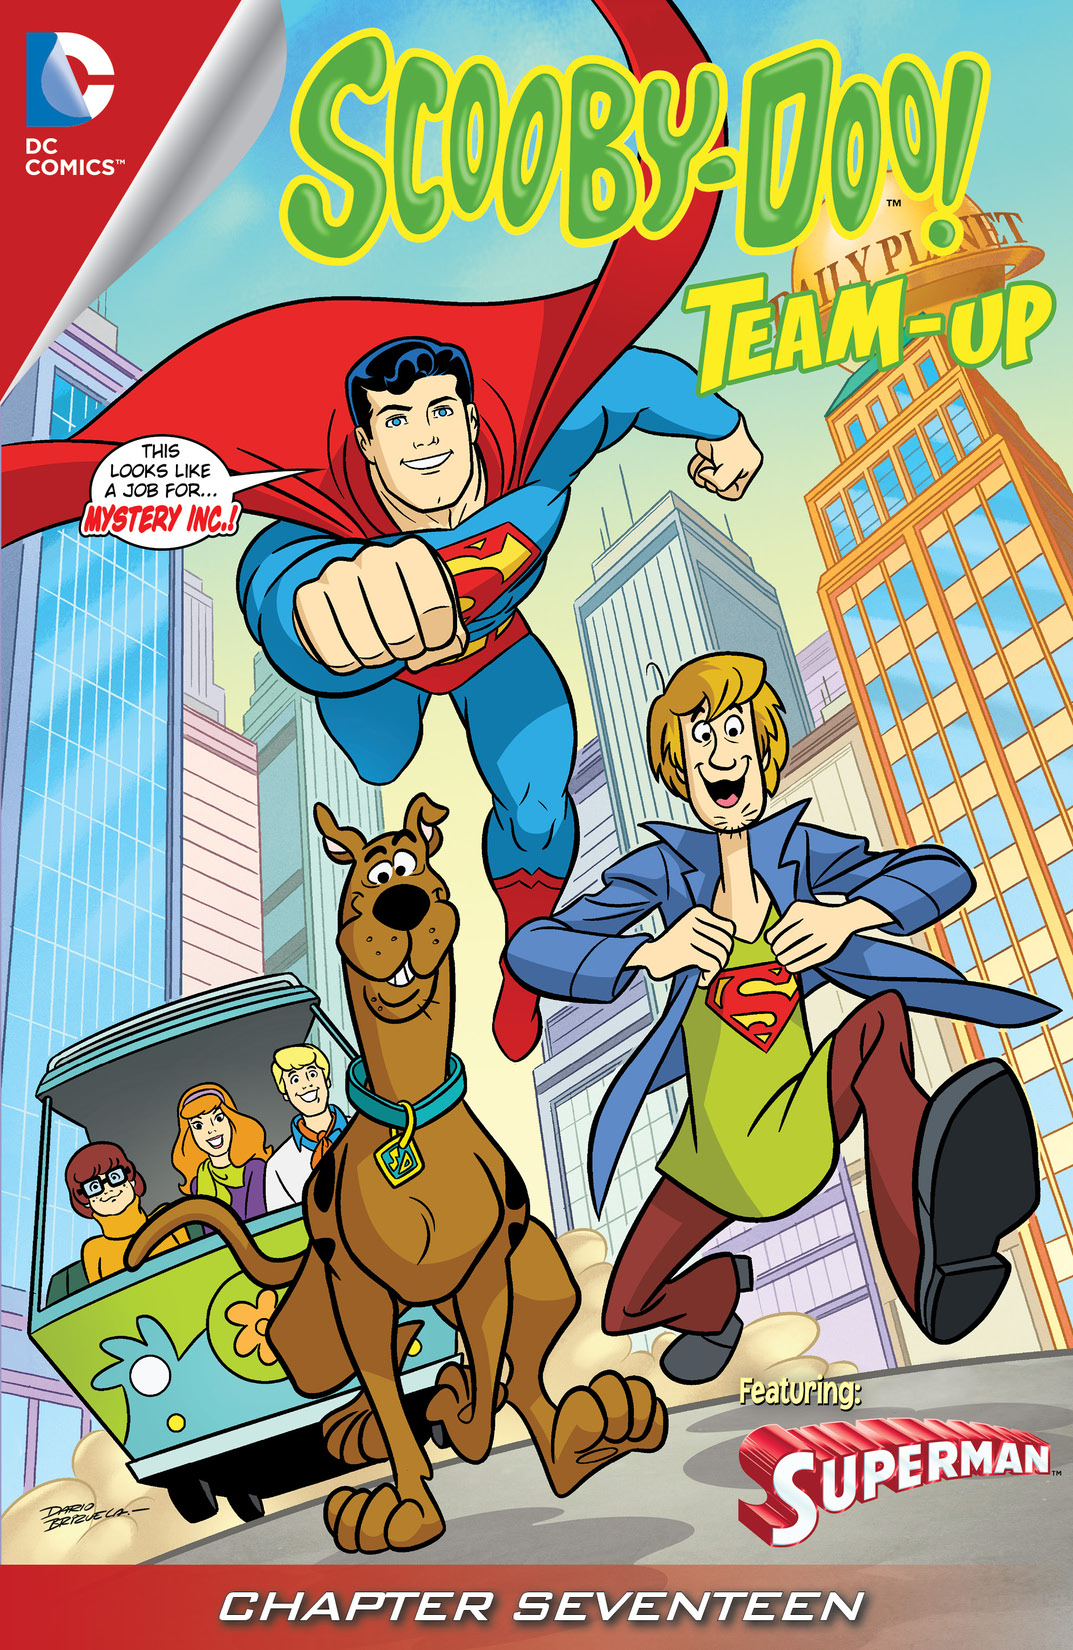 Scooby-Doo Team-Up #17 preview images